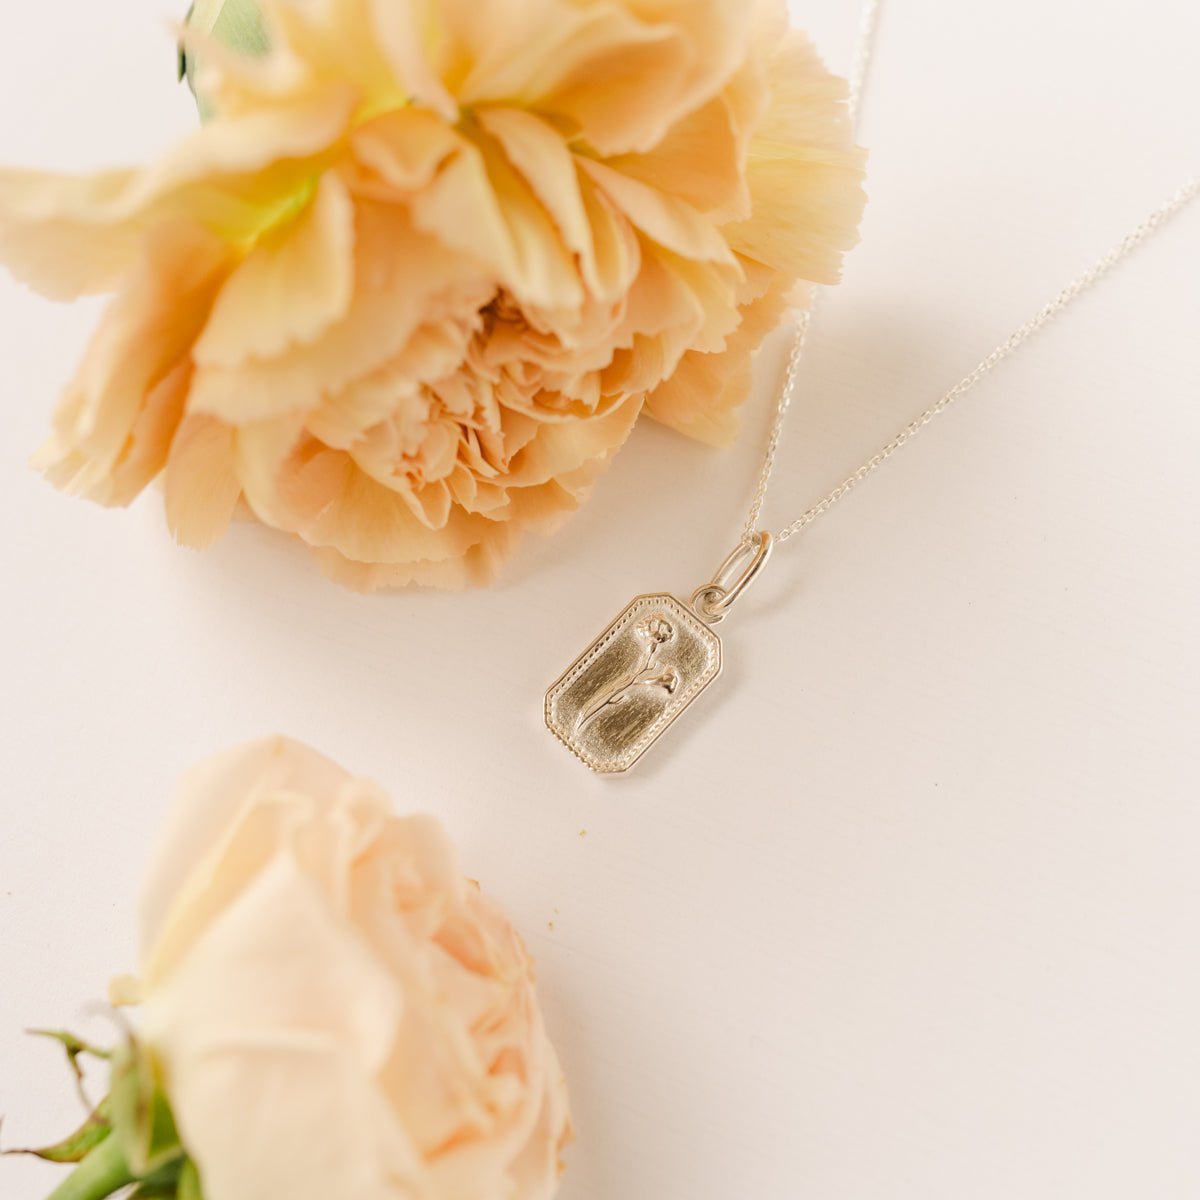 FRAICHE INSPIRE JANUARY BIRTH FLOWER NECKLACE - CARNATION - SILVER - SO PRETTY CARA COTTER